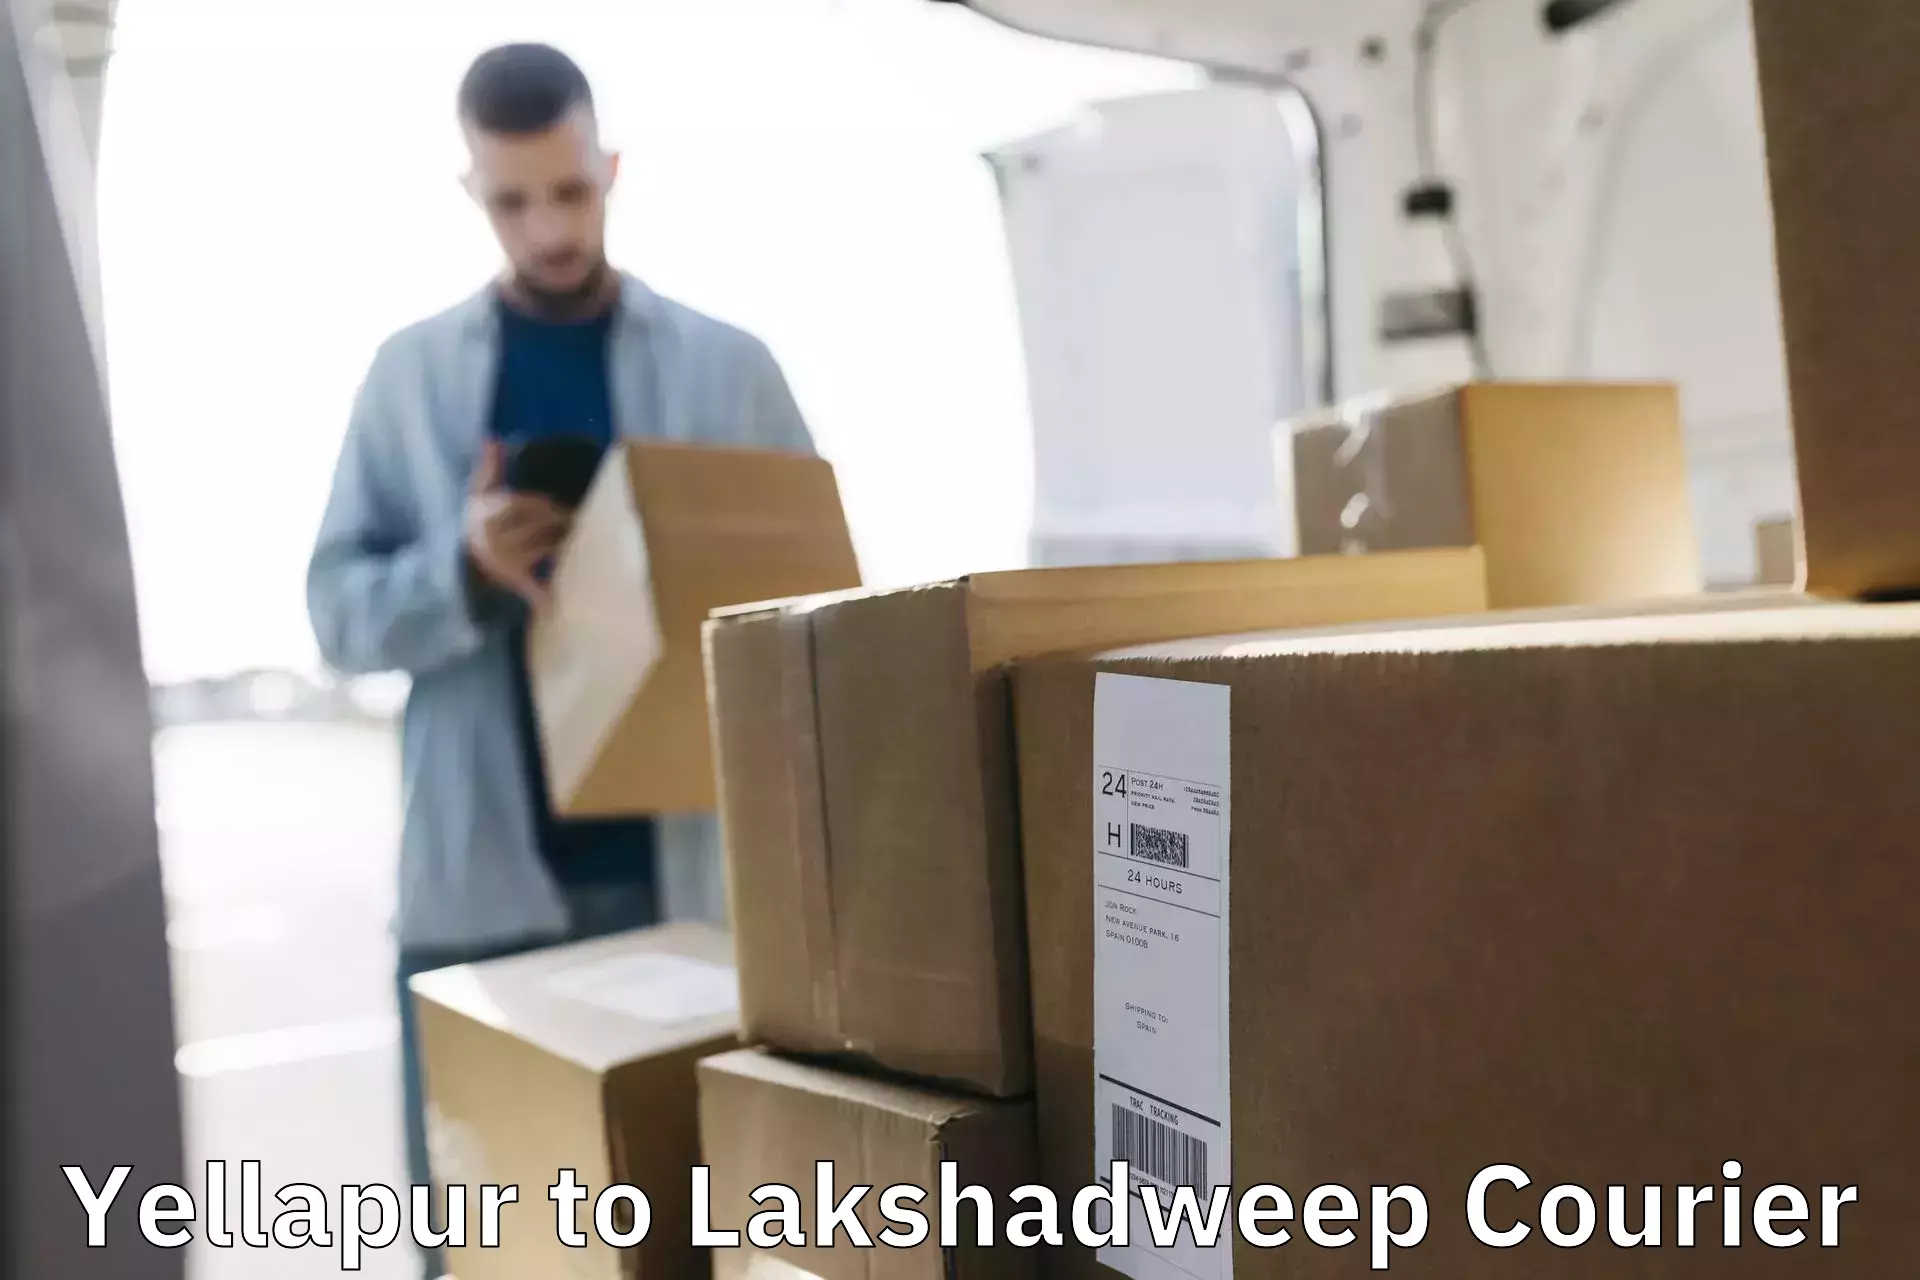 Local delivery service Yellapur to Lakshadweep